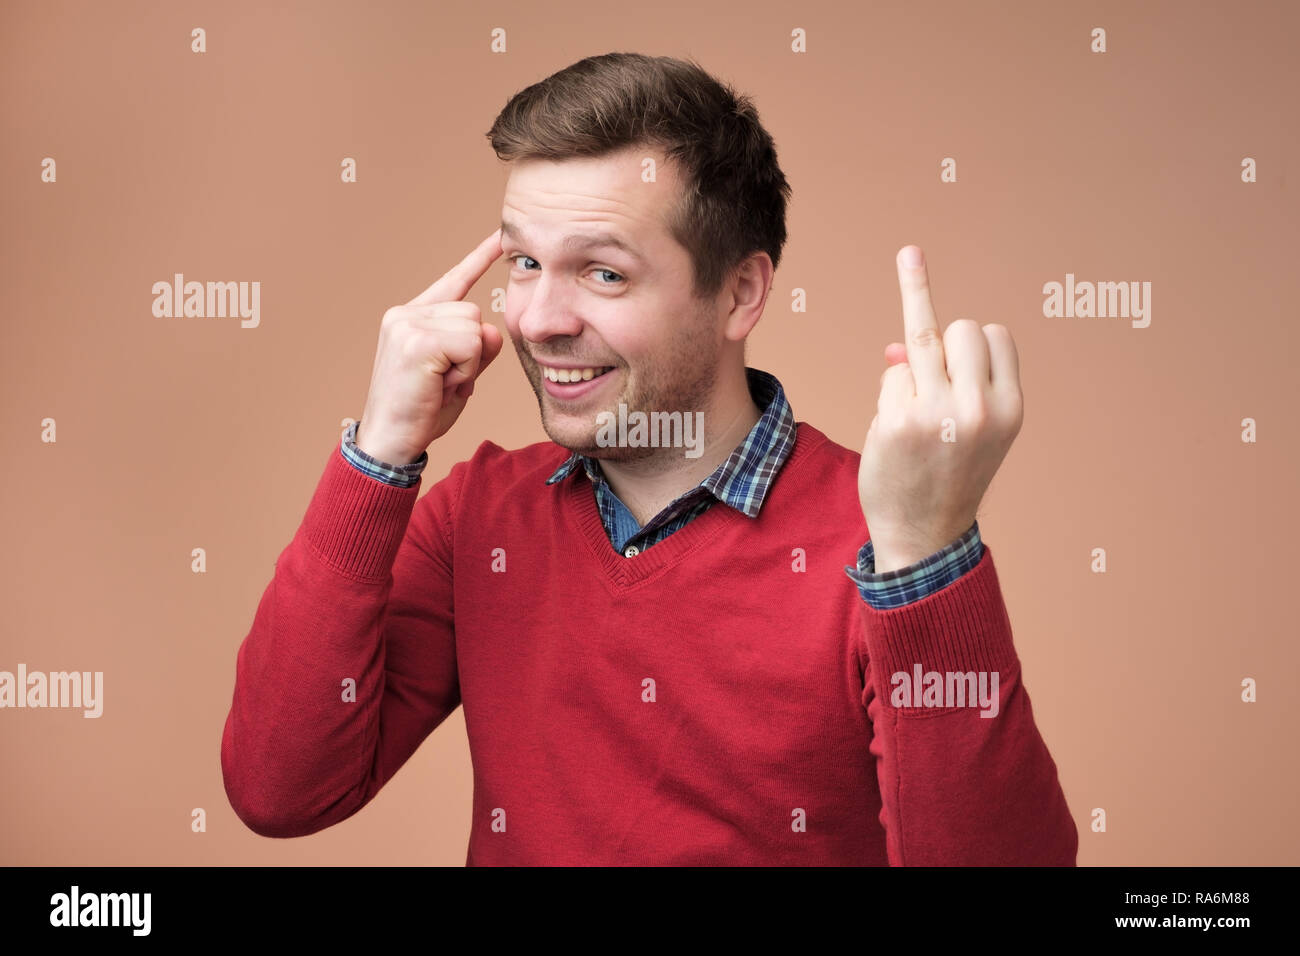 Caucasian smiling man in red sweater showing his finger without marriage ring Stock Photo